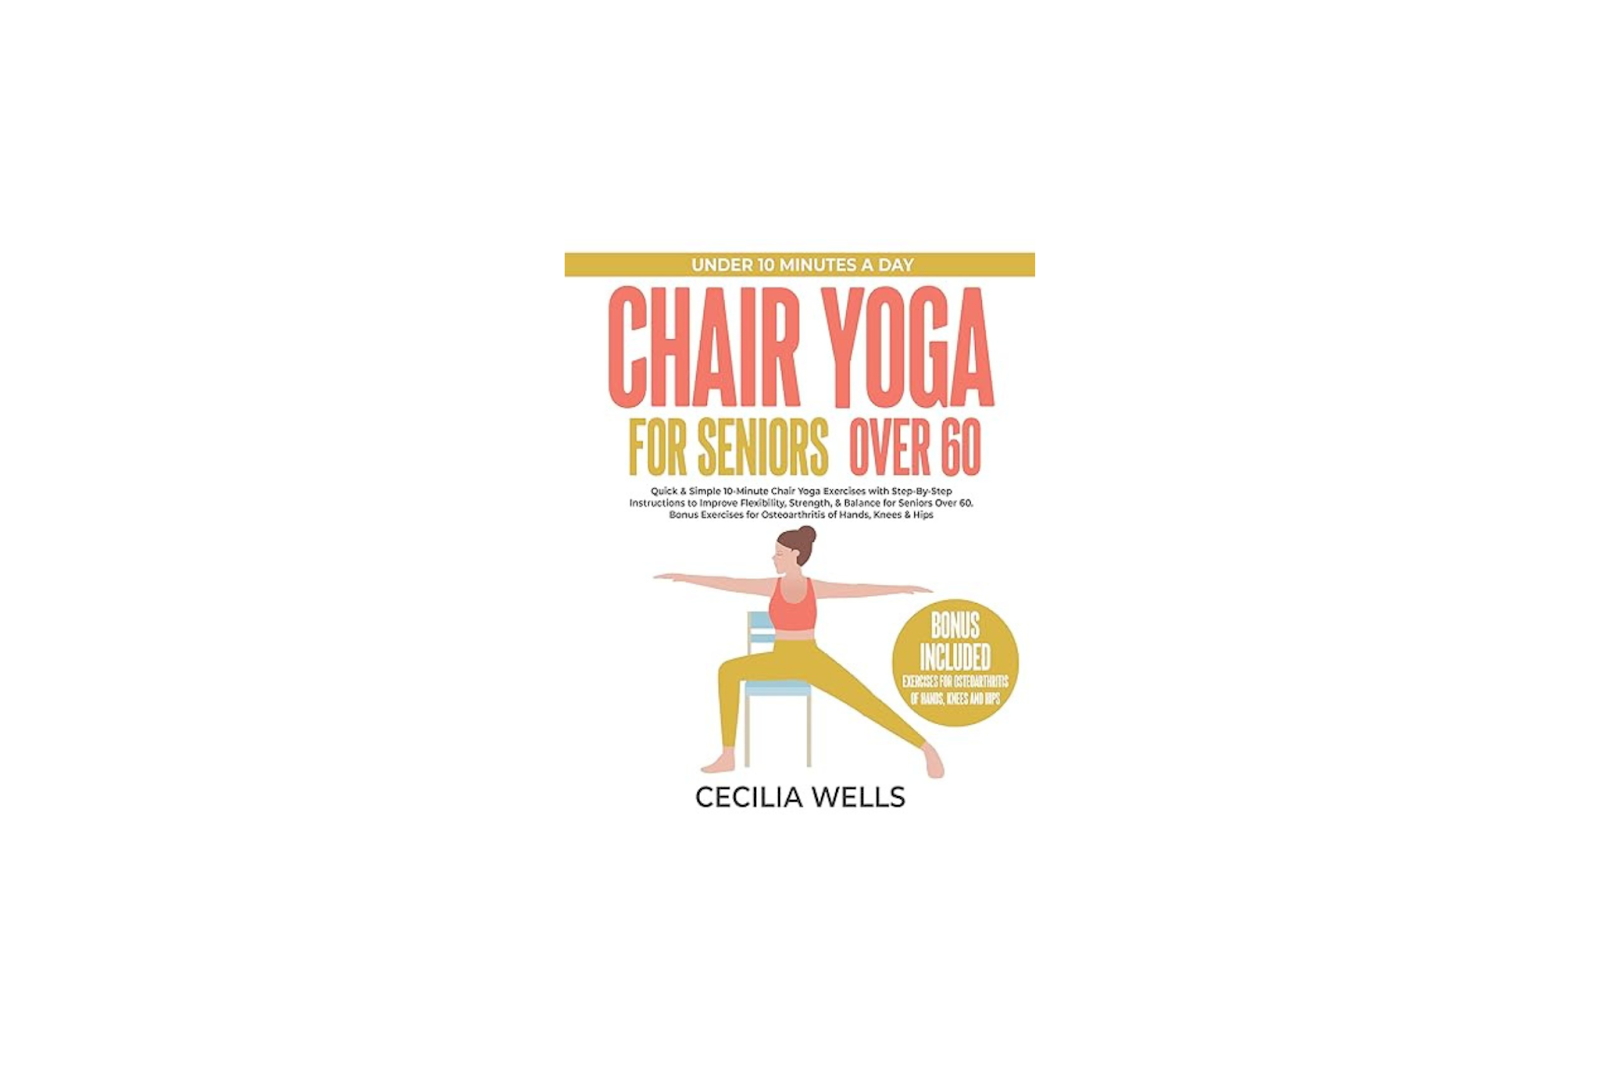  Chair Yoga for Seniors Over 60: Cecilia Wells